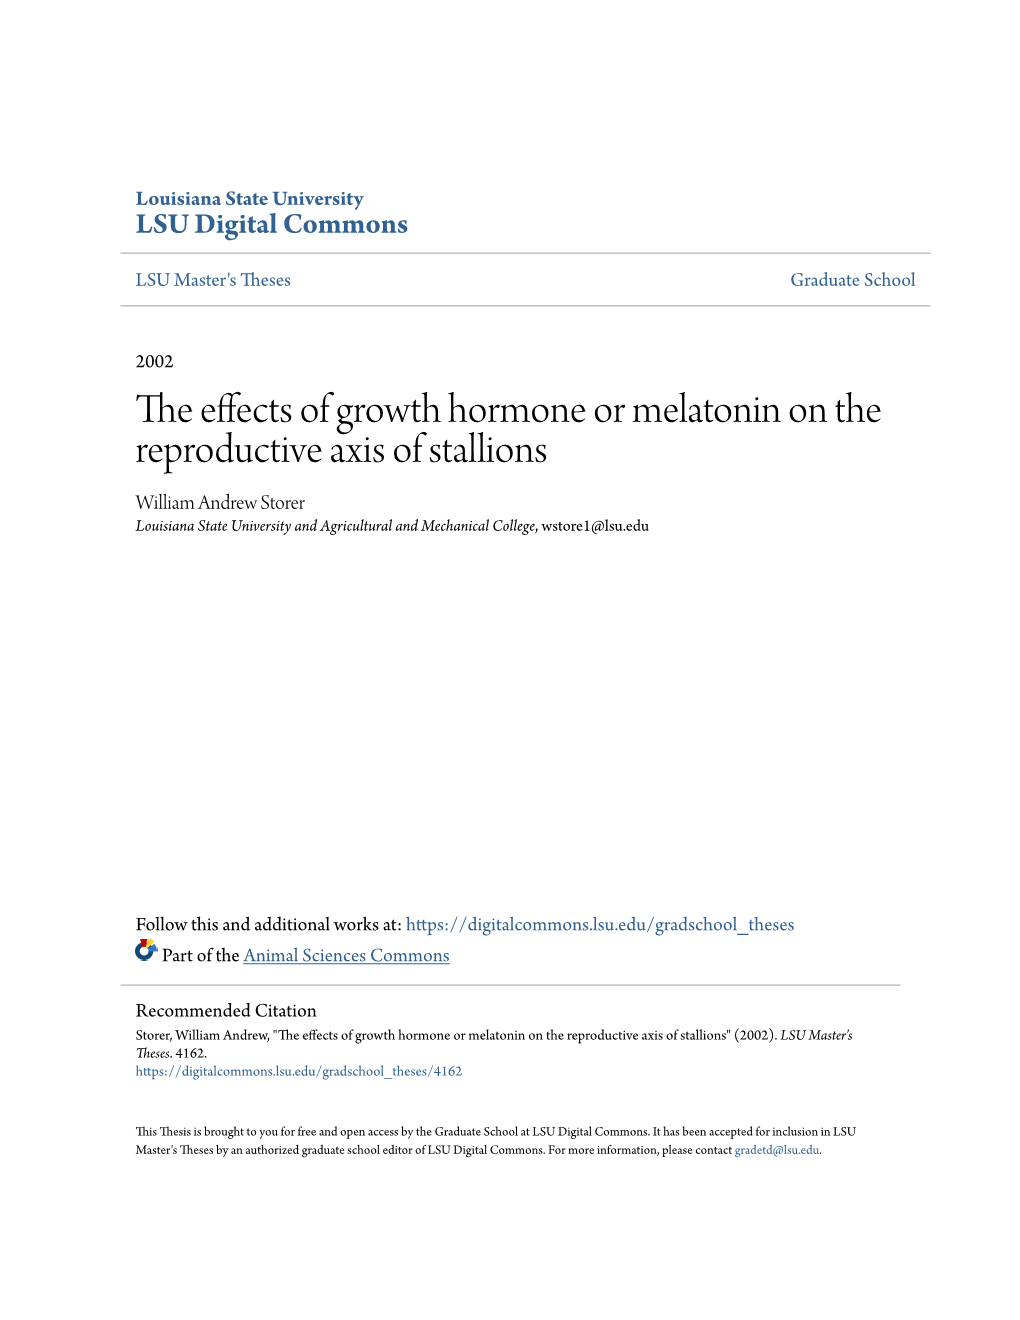 The Effects of Growth Hormone Or Melatonin on the Reproductive Axis of Stallions